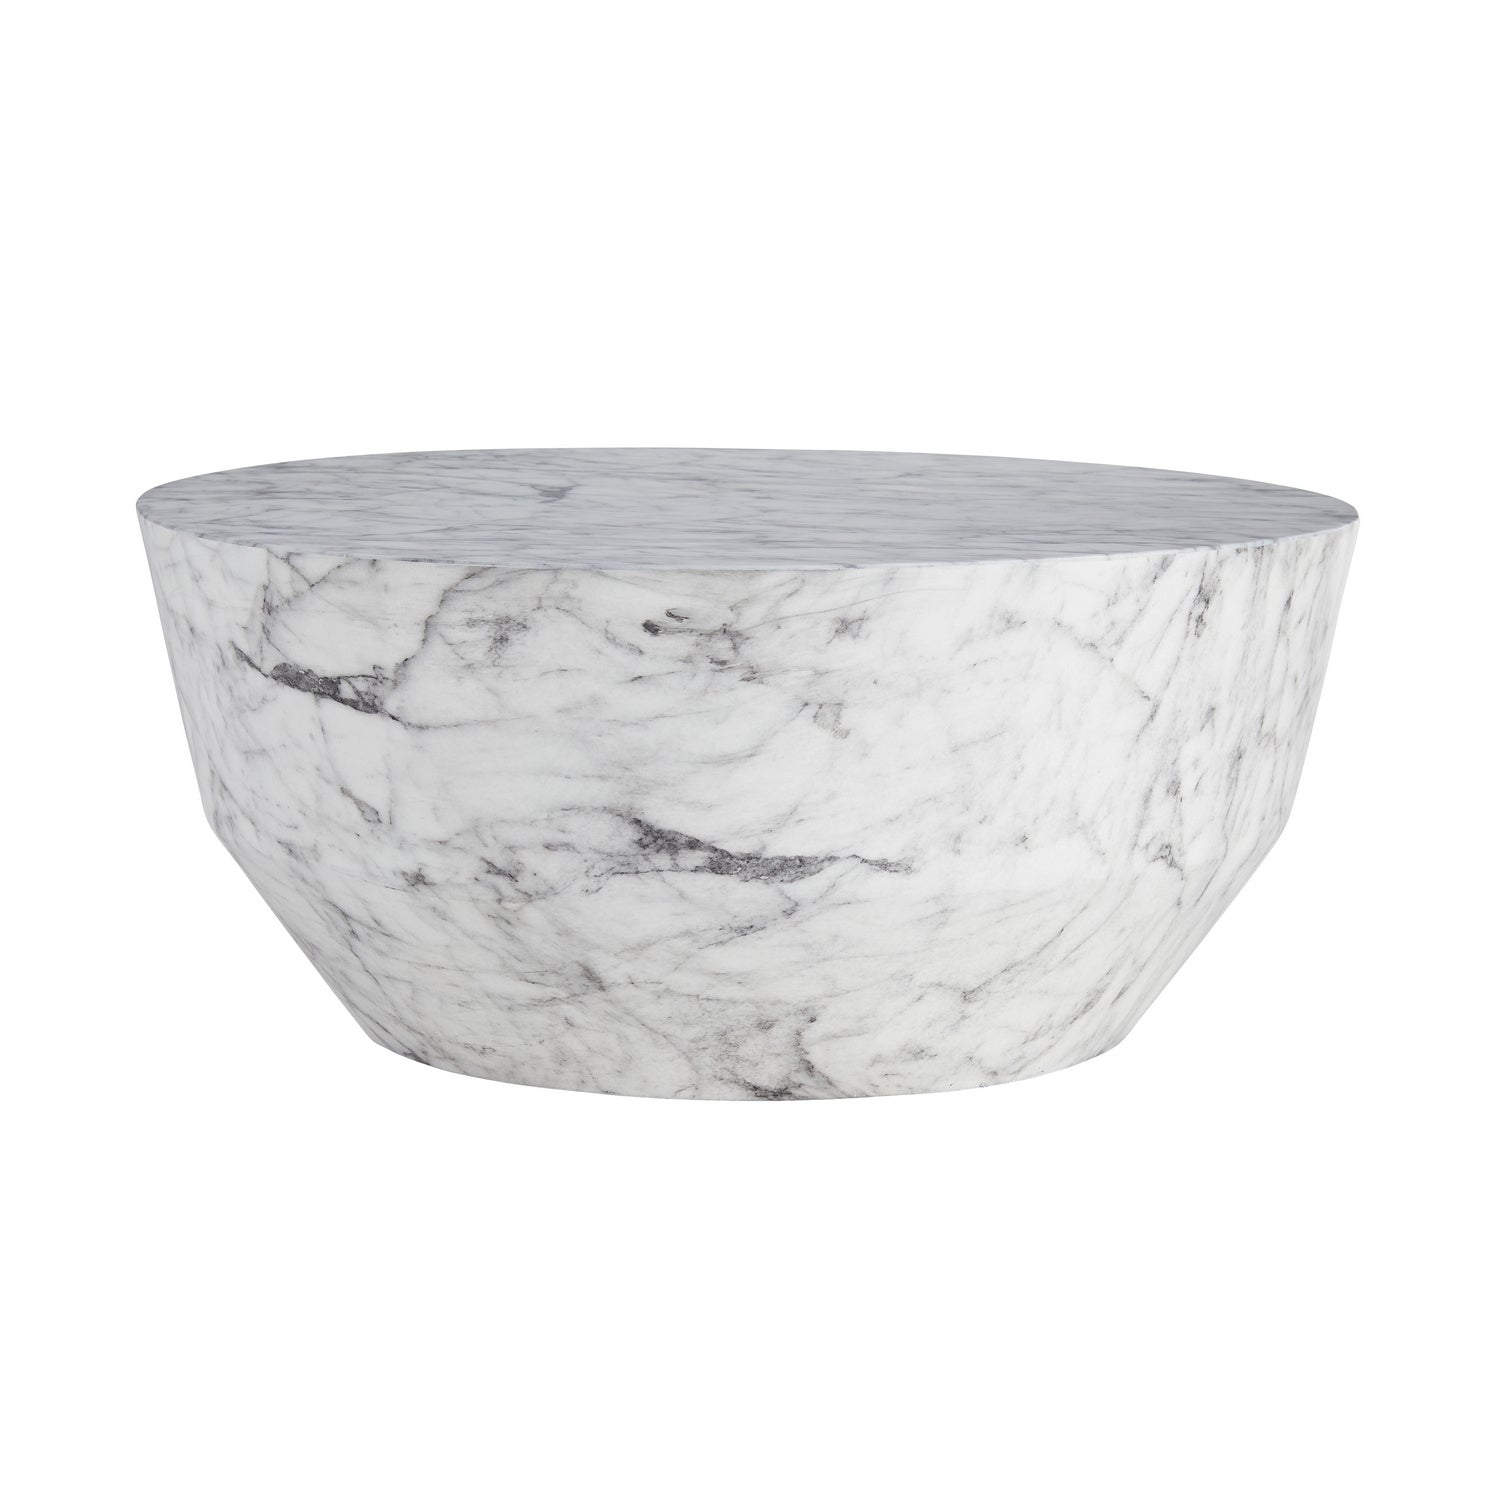 Cocktail Table from the Godwin collection in White Faux Marble finish